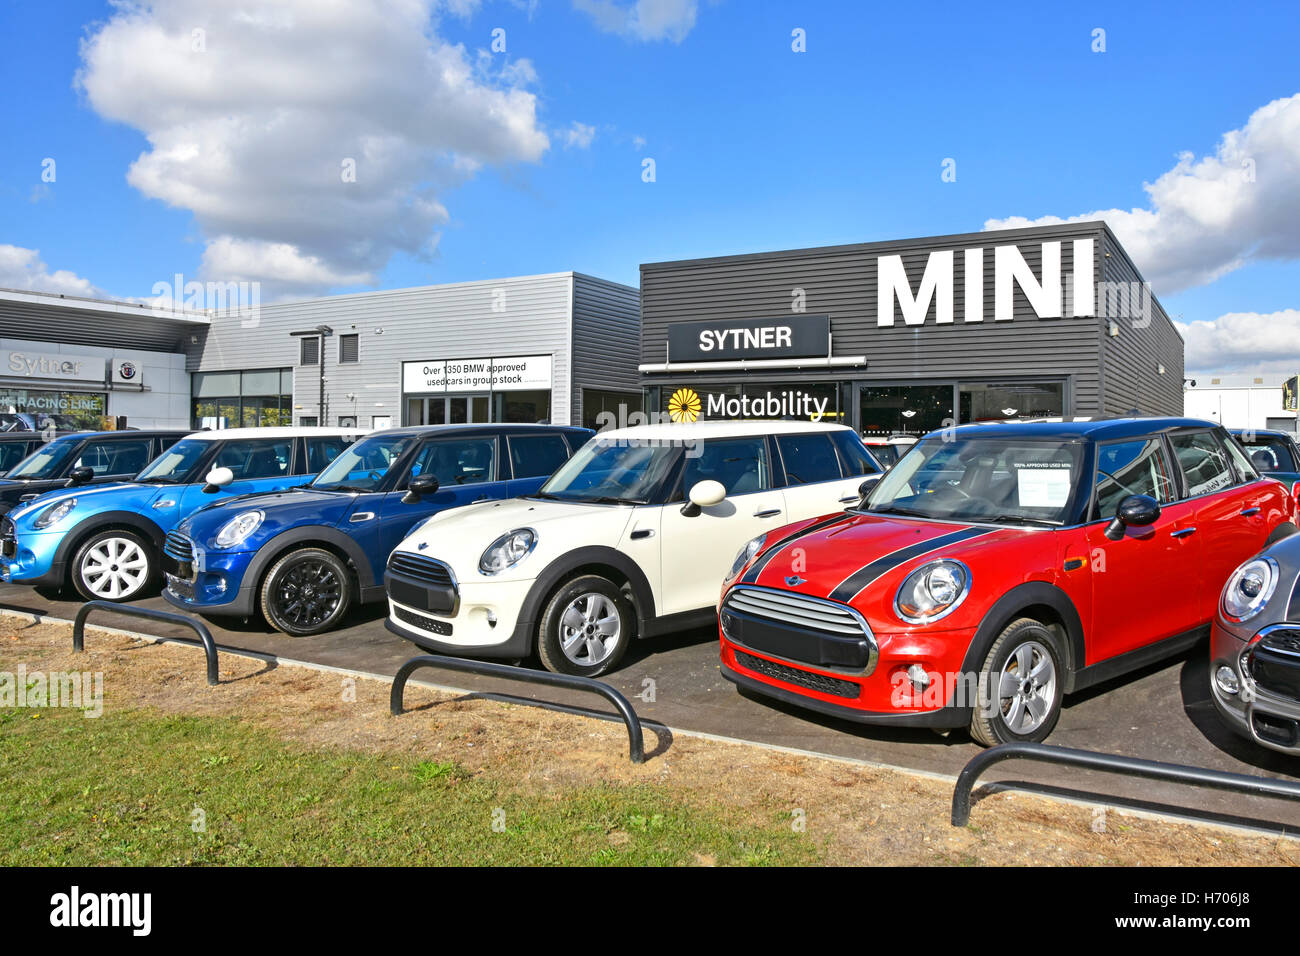 Row of used car dealers second hand BMW Mini cars for sale on garage forecourt in front of Sytner dealership showroom London England UK Stock Photo